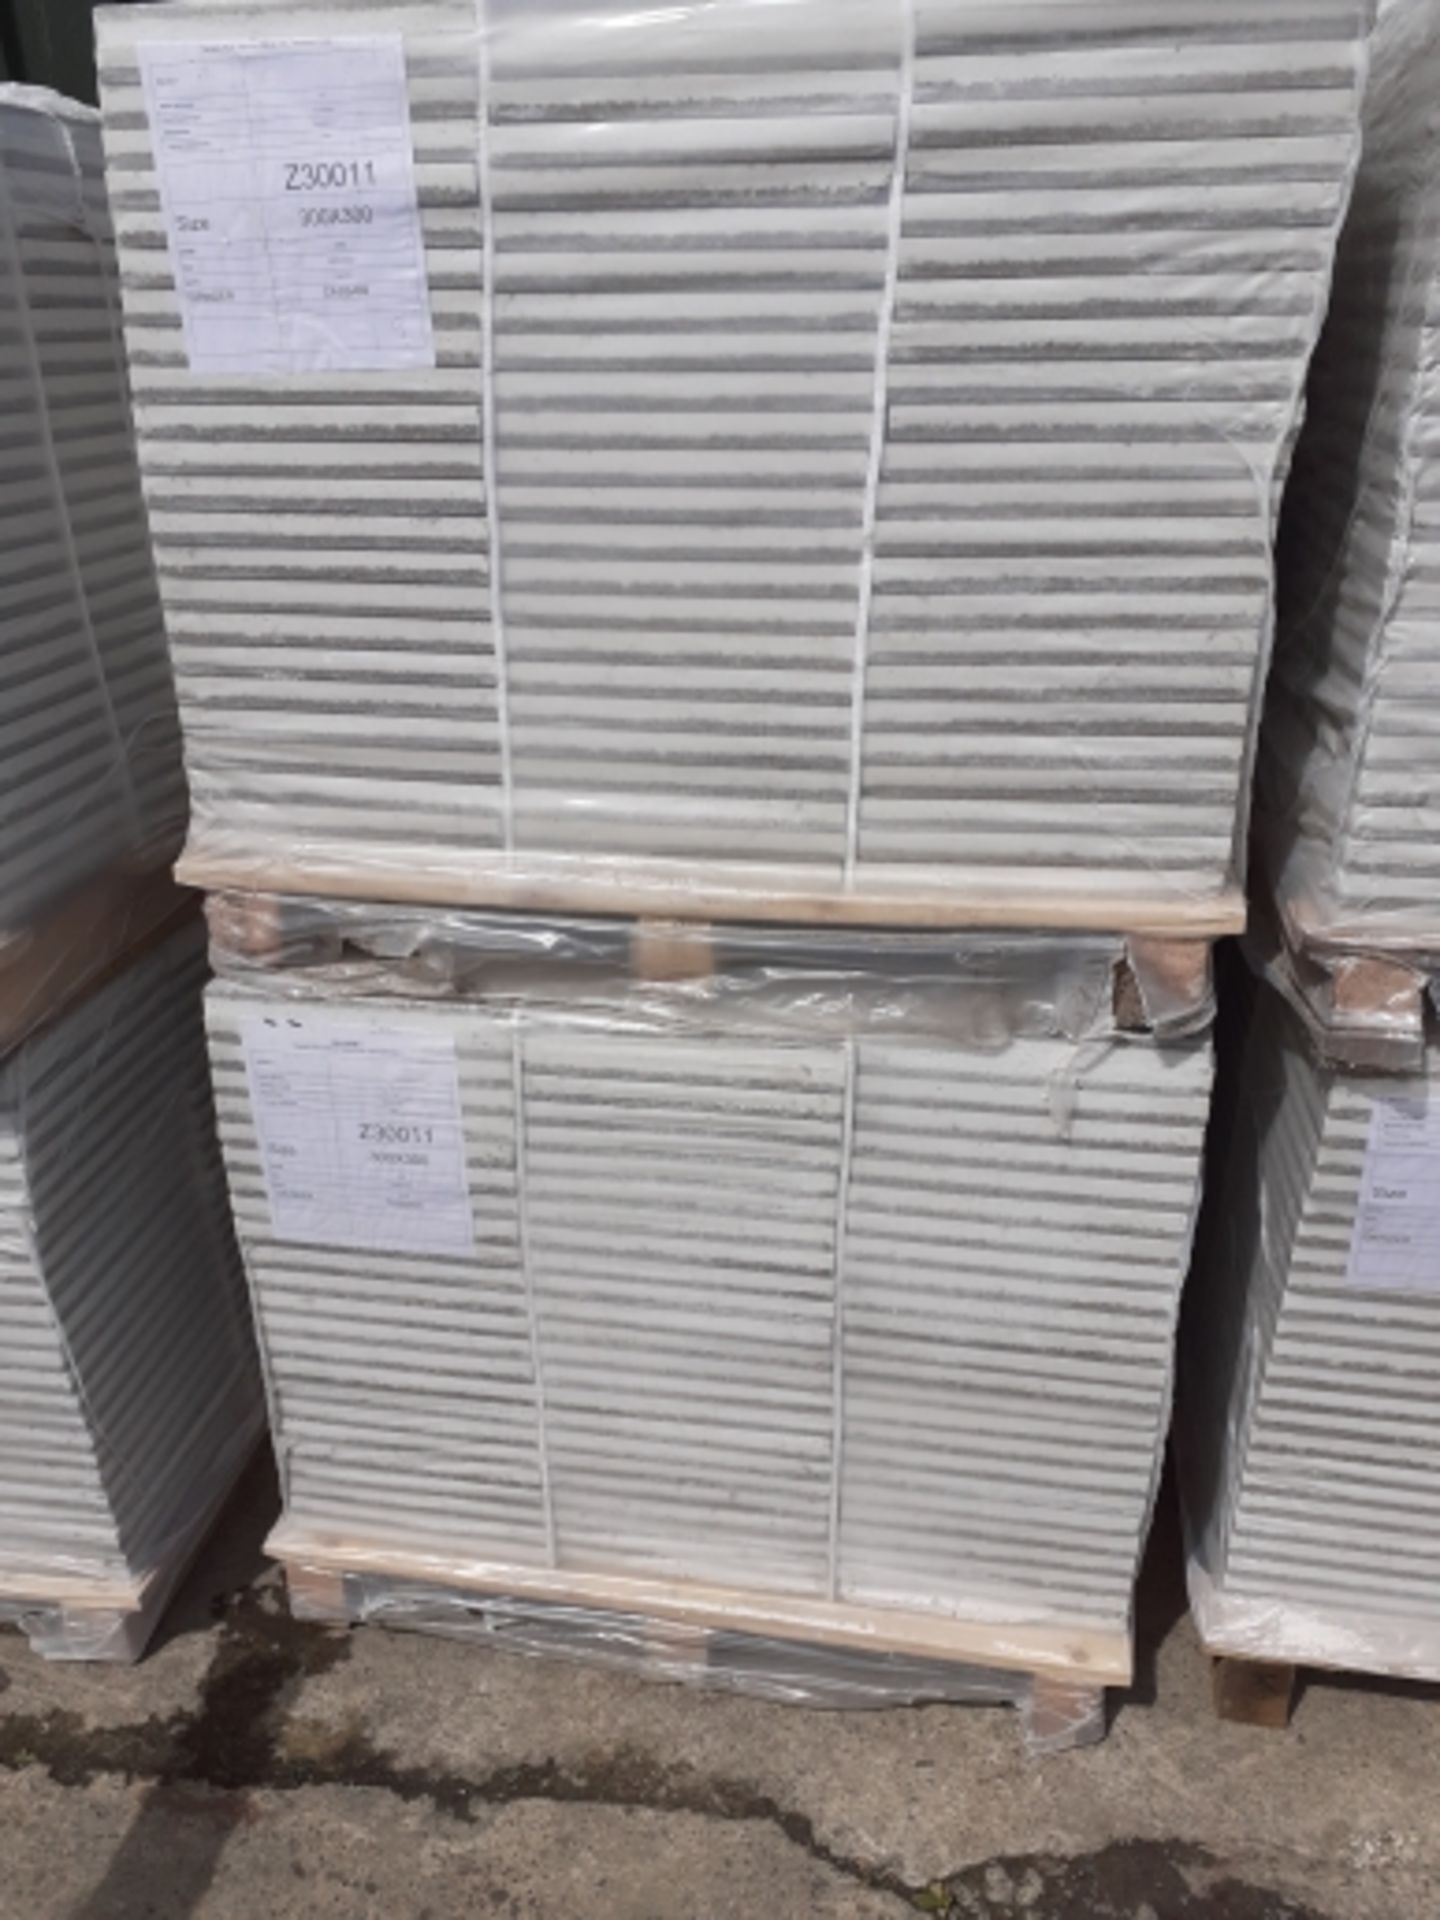 1 x Pallet of Brand New Grey Commercial Floor Tiles (Z30011) 24 Square Yards Coverage